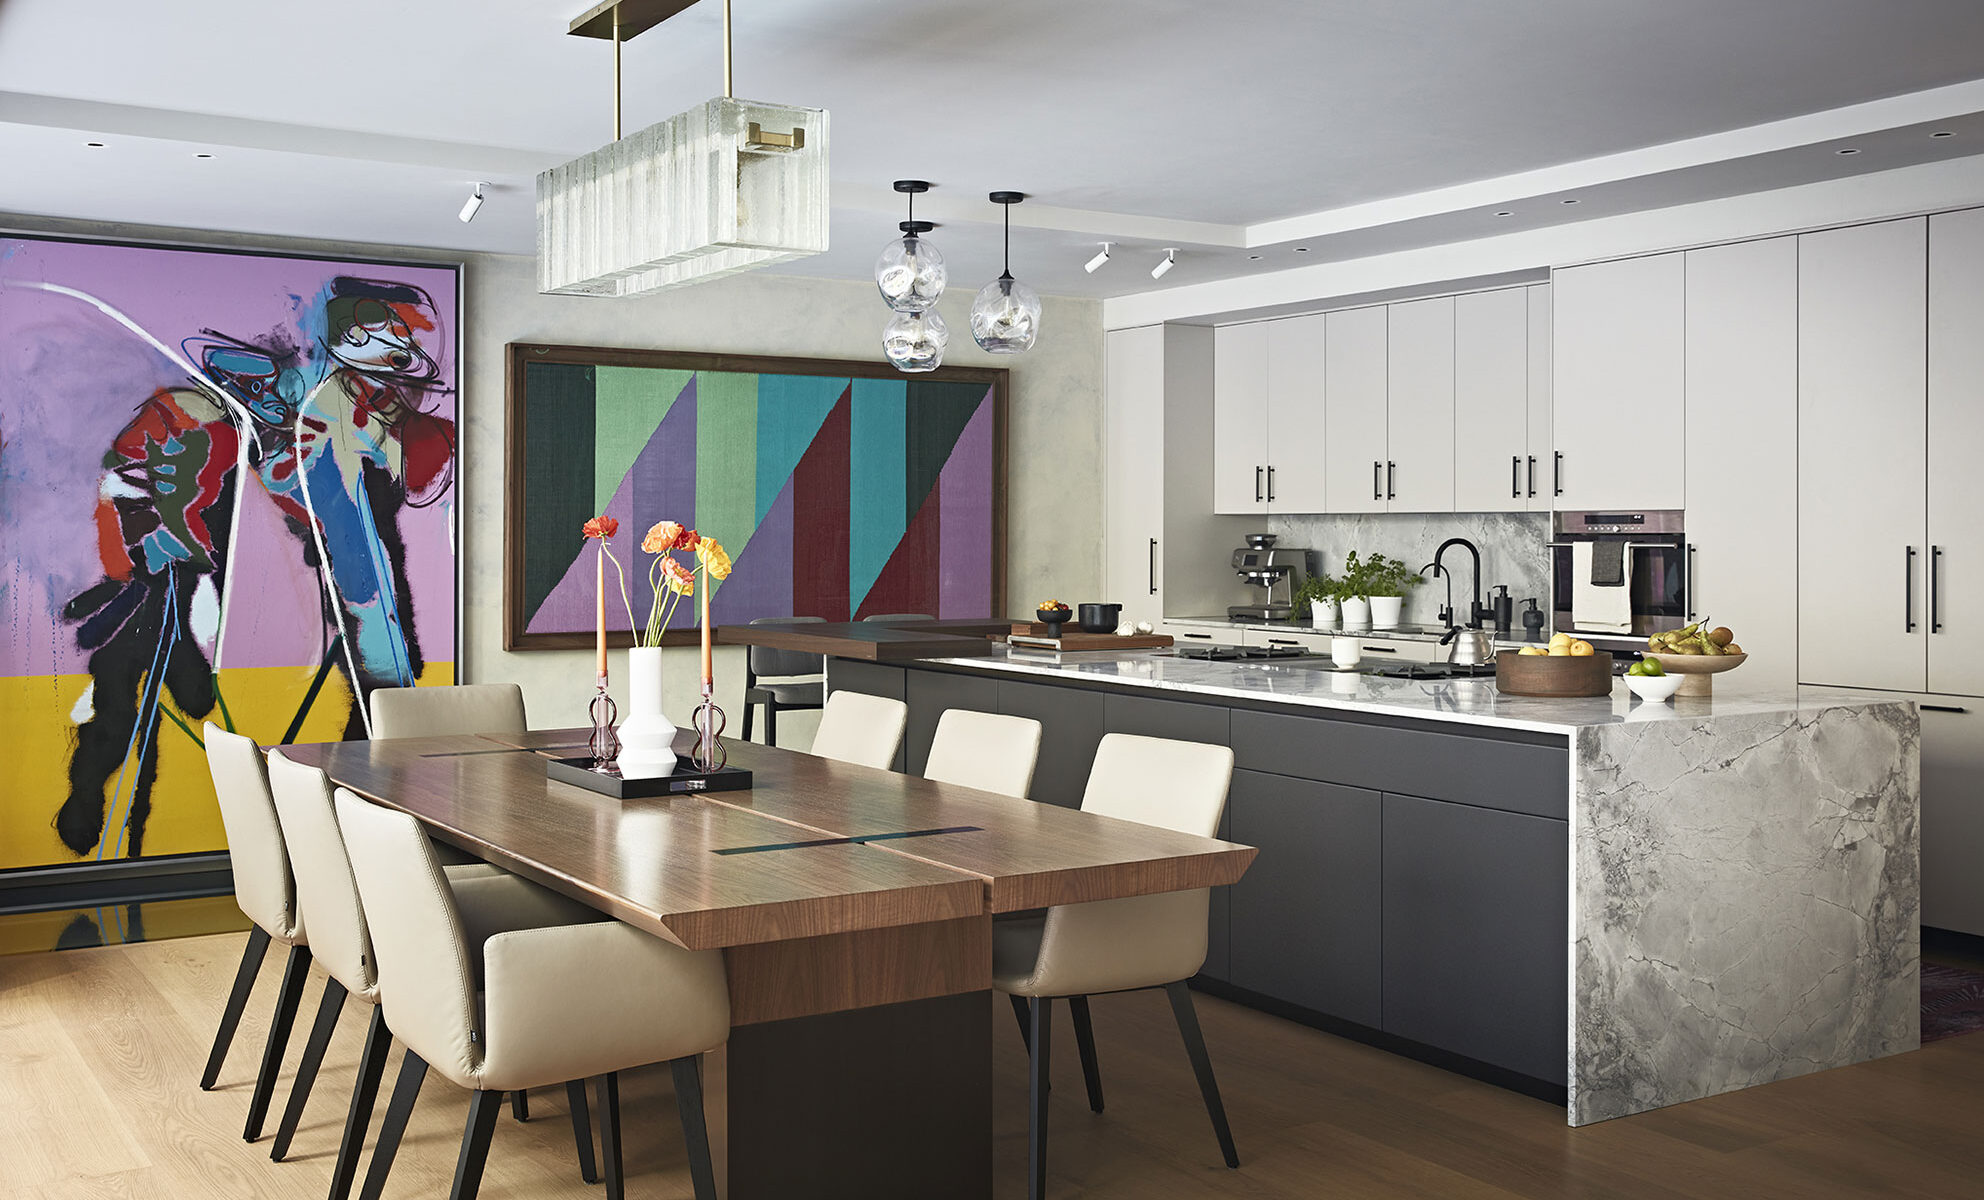 Luxury kitchen and dining room interior design in Notting Hill West London with a marble kitchen counter and colourful artworks on the wall